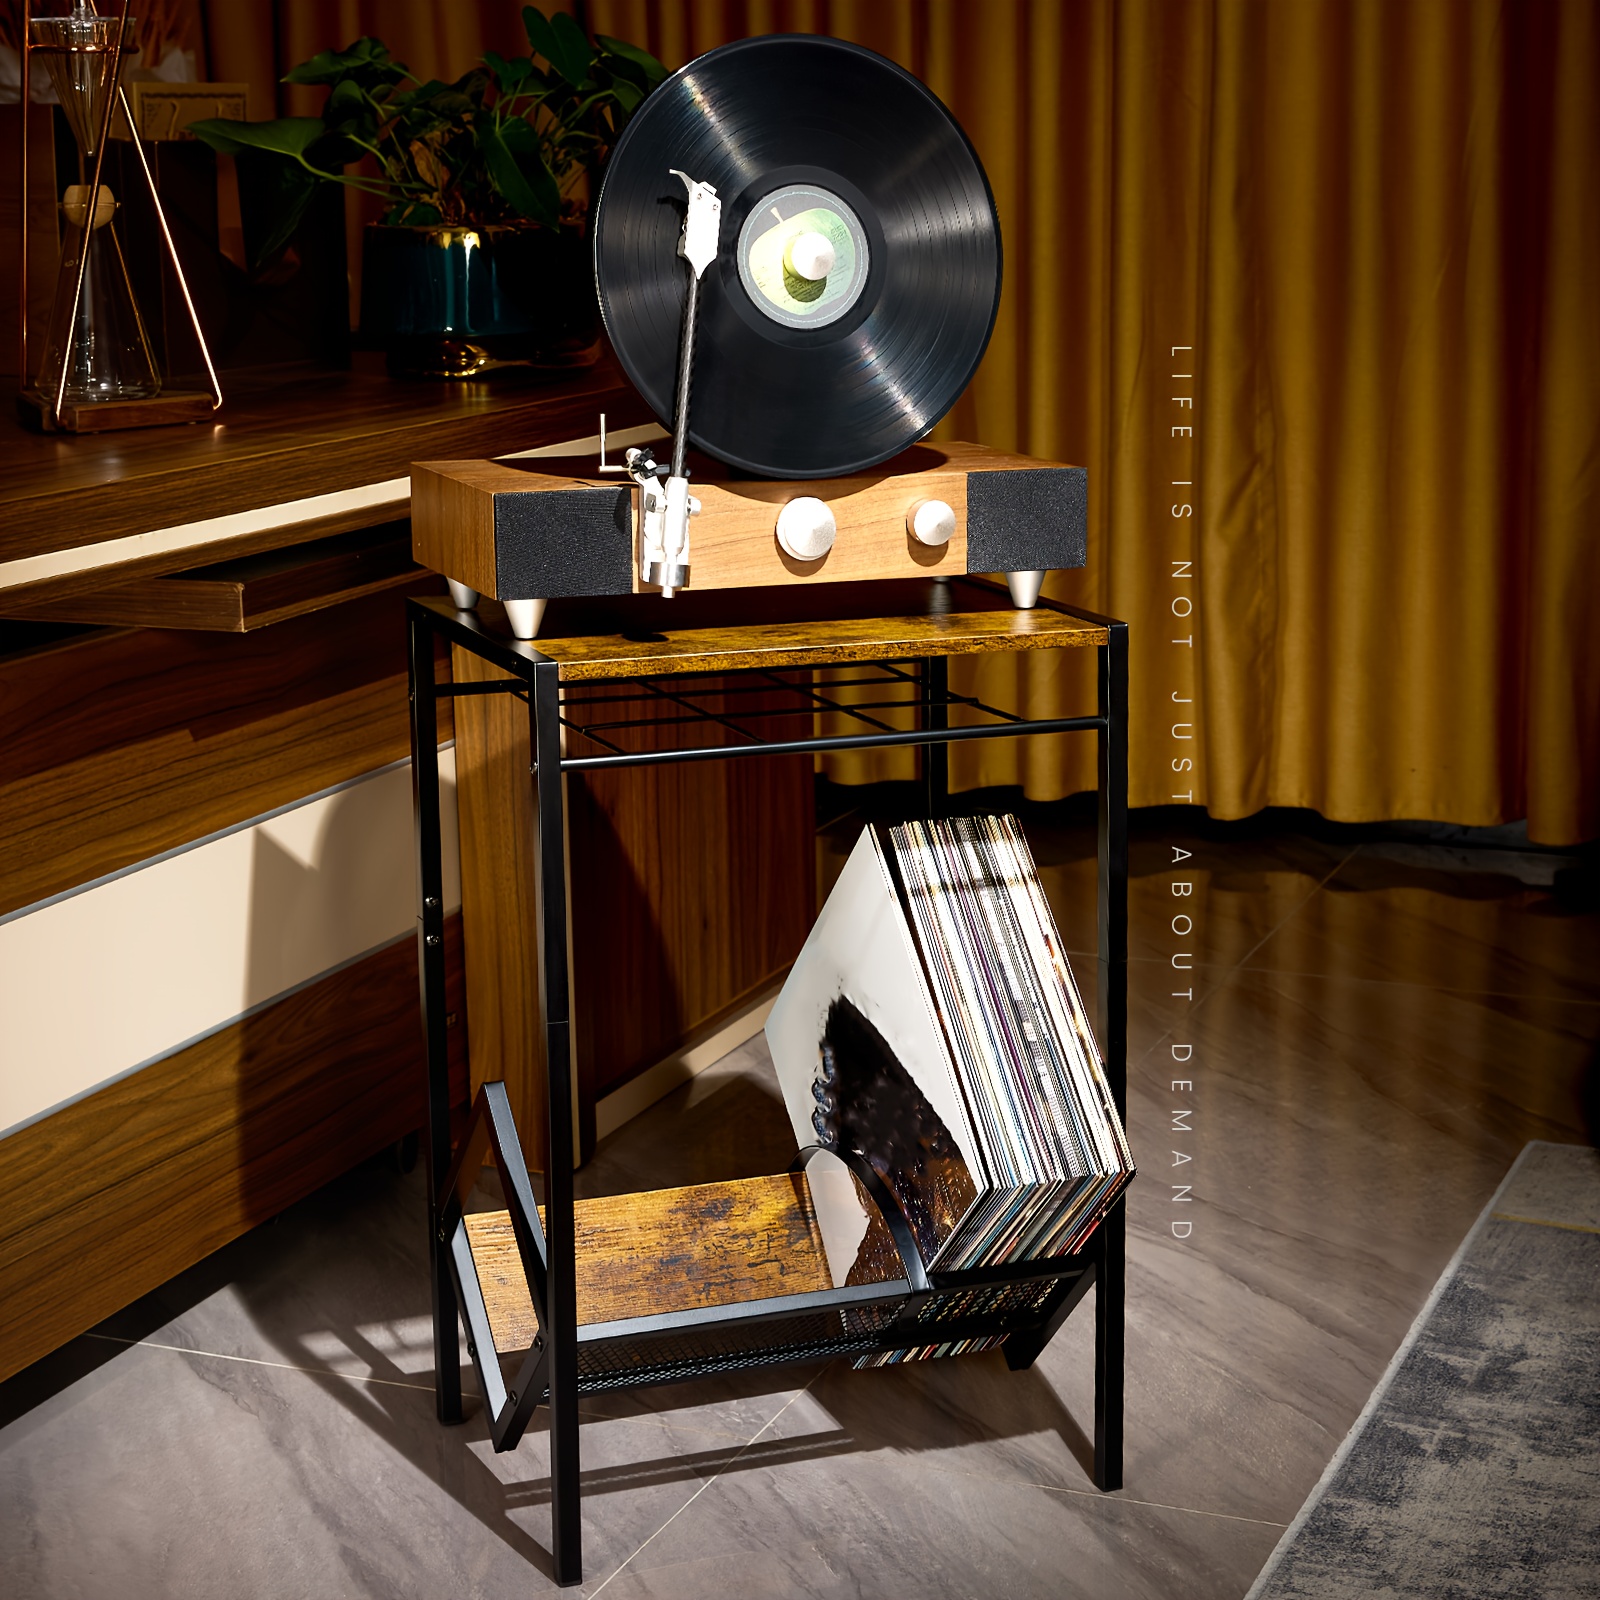 Record Holder,Vinyl Record Holder,Vinyl Record Storage,Record Holder of  Wood and Iron,Classic Design Record Holder can Hold 90-100 Vinyl  Storage,Easy Access Record Holder.Black